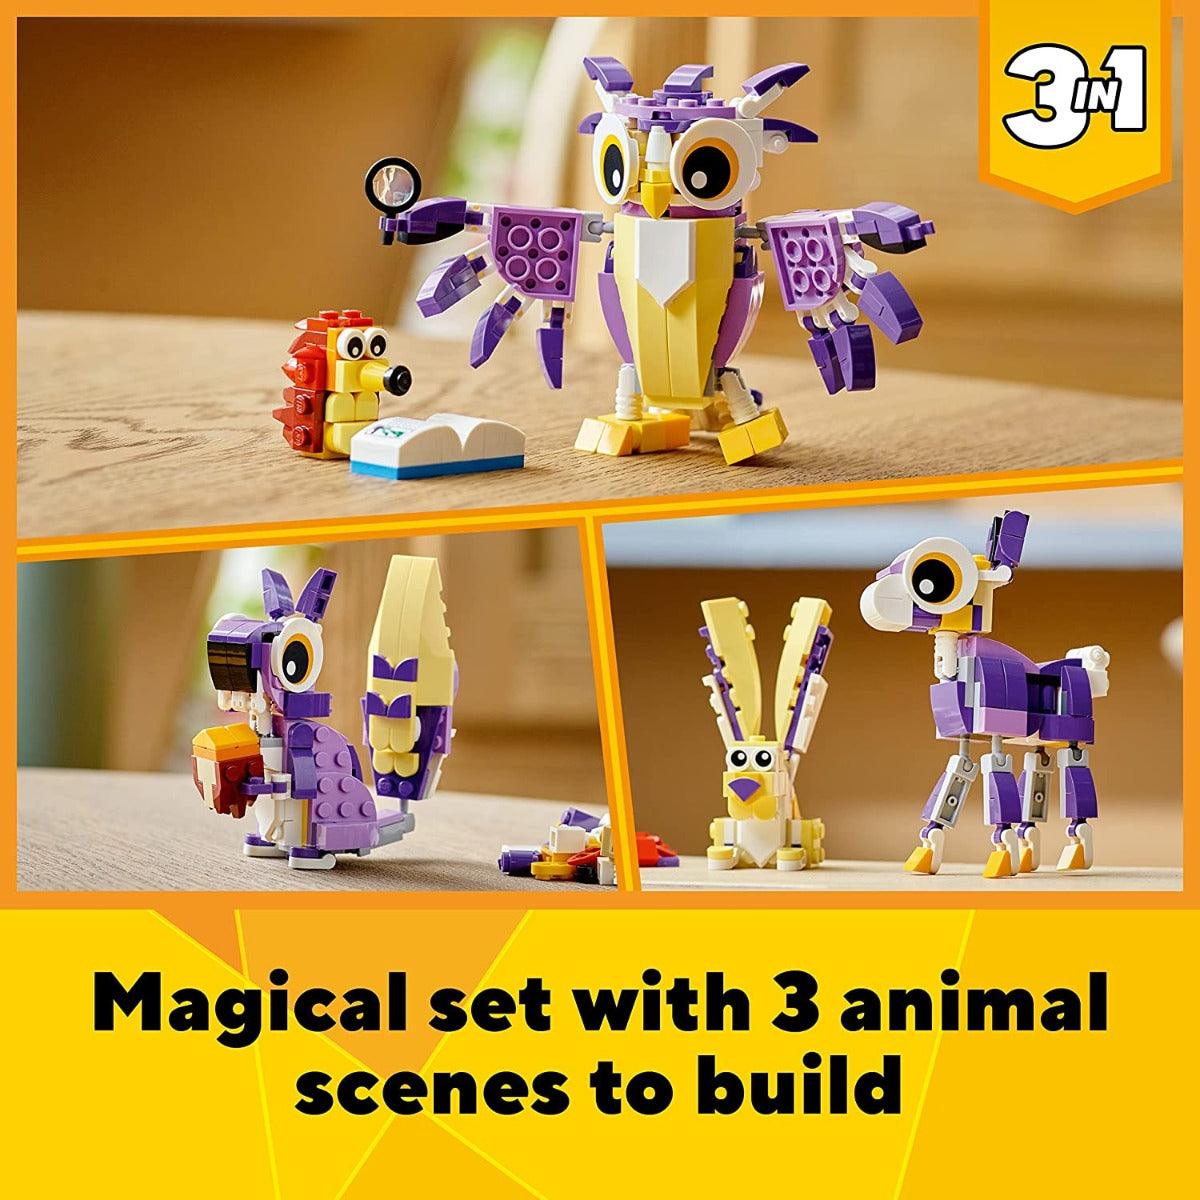 LEGO Creator 3in1 Fantasy Forest Creatures Building Kit for Ages 7+